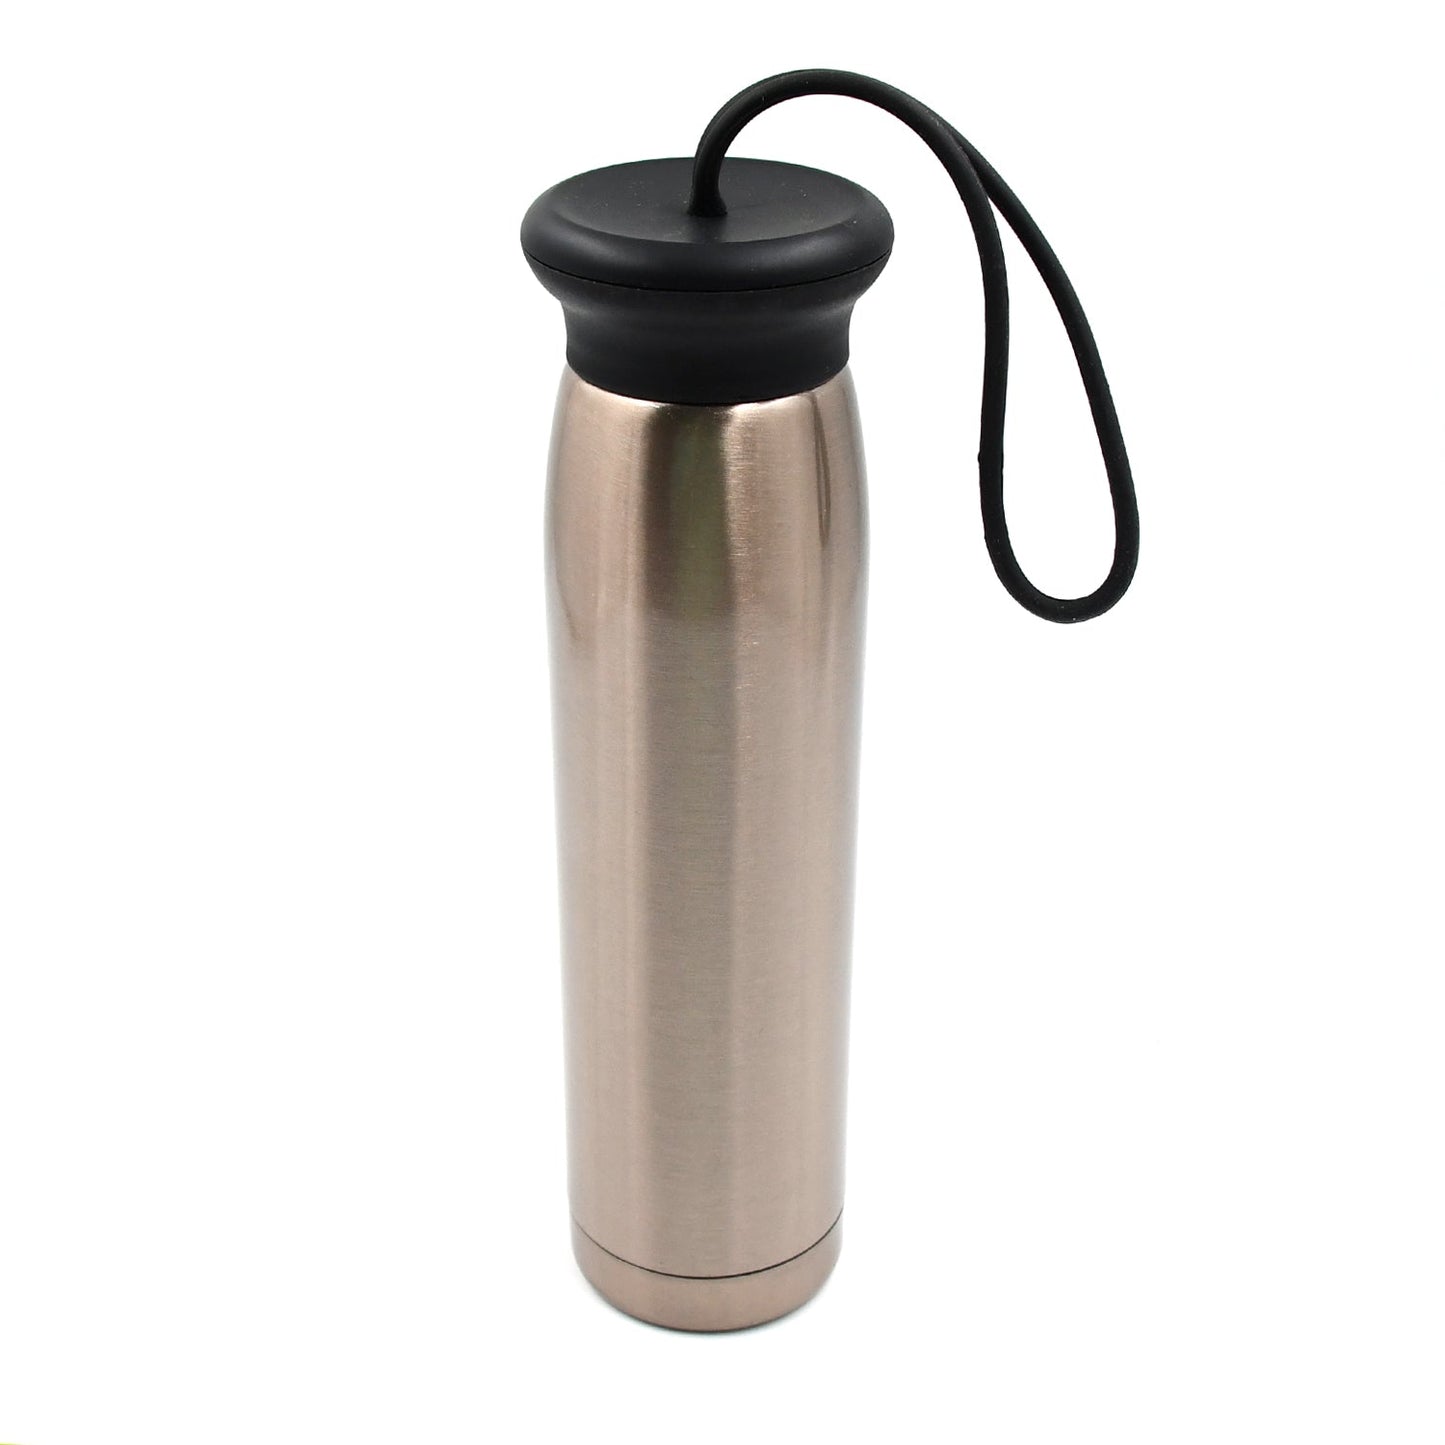 6854 Insulated Flask | Hot and Cold Stainless Steel Water Bottle | Double Walled Carry Flask for Travel, Home, Office, School | 320 ml